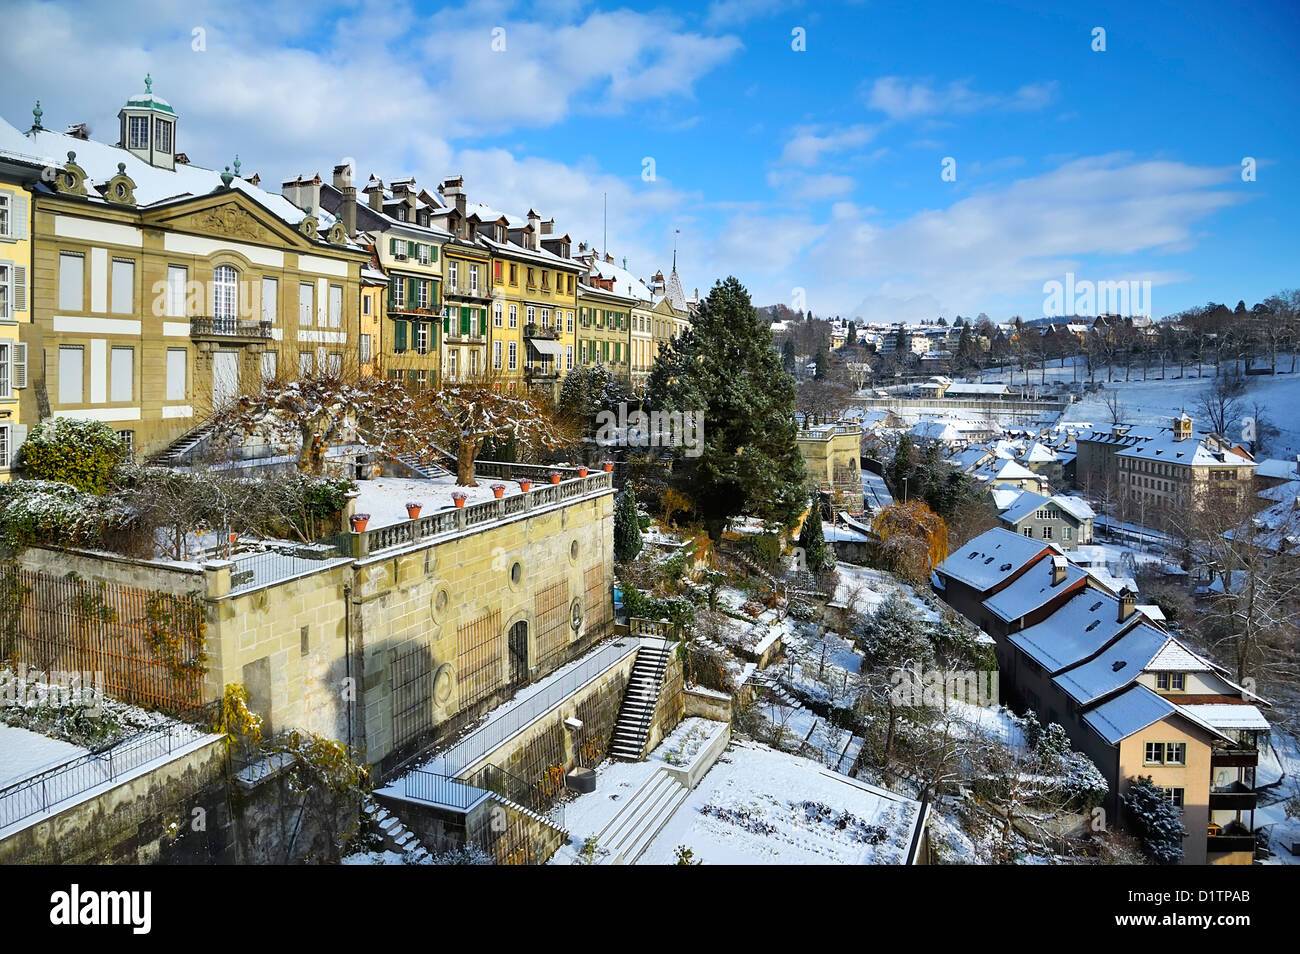 First snow covers the capital city of Bern, Switzerland. Stock Photo